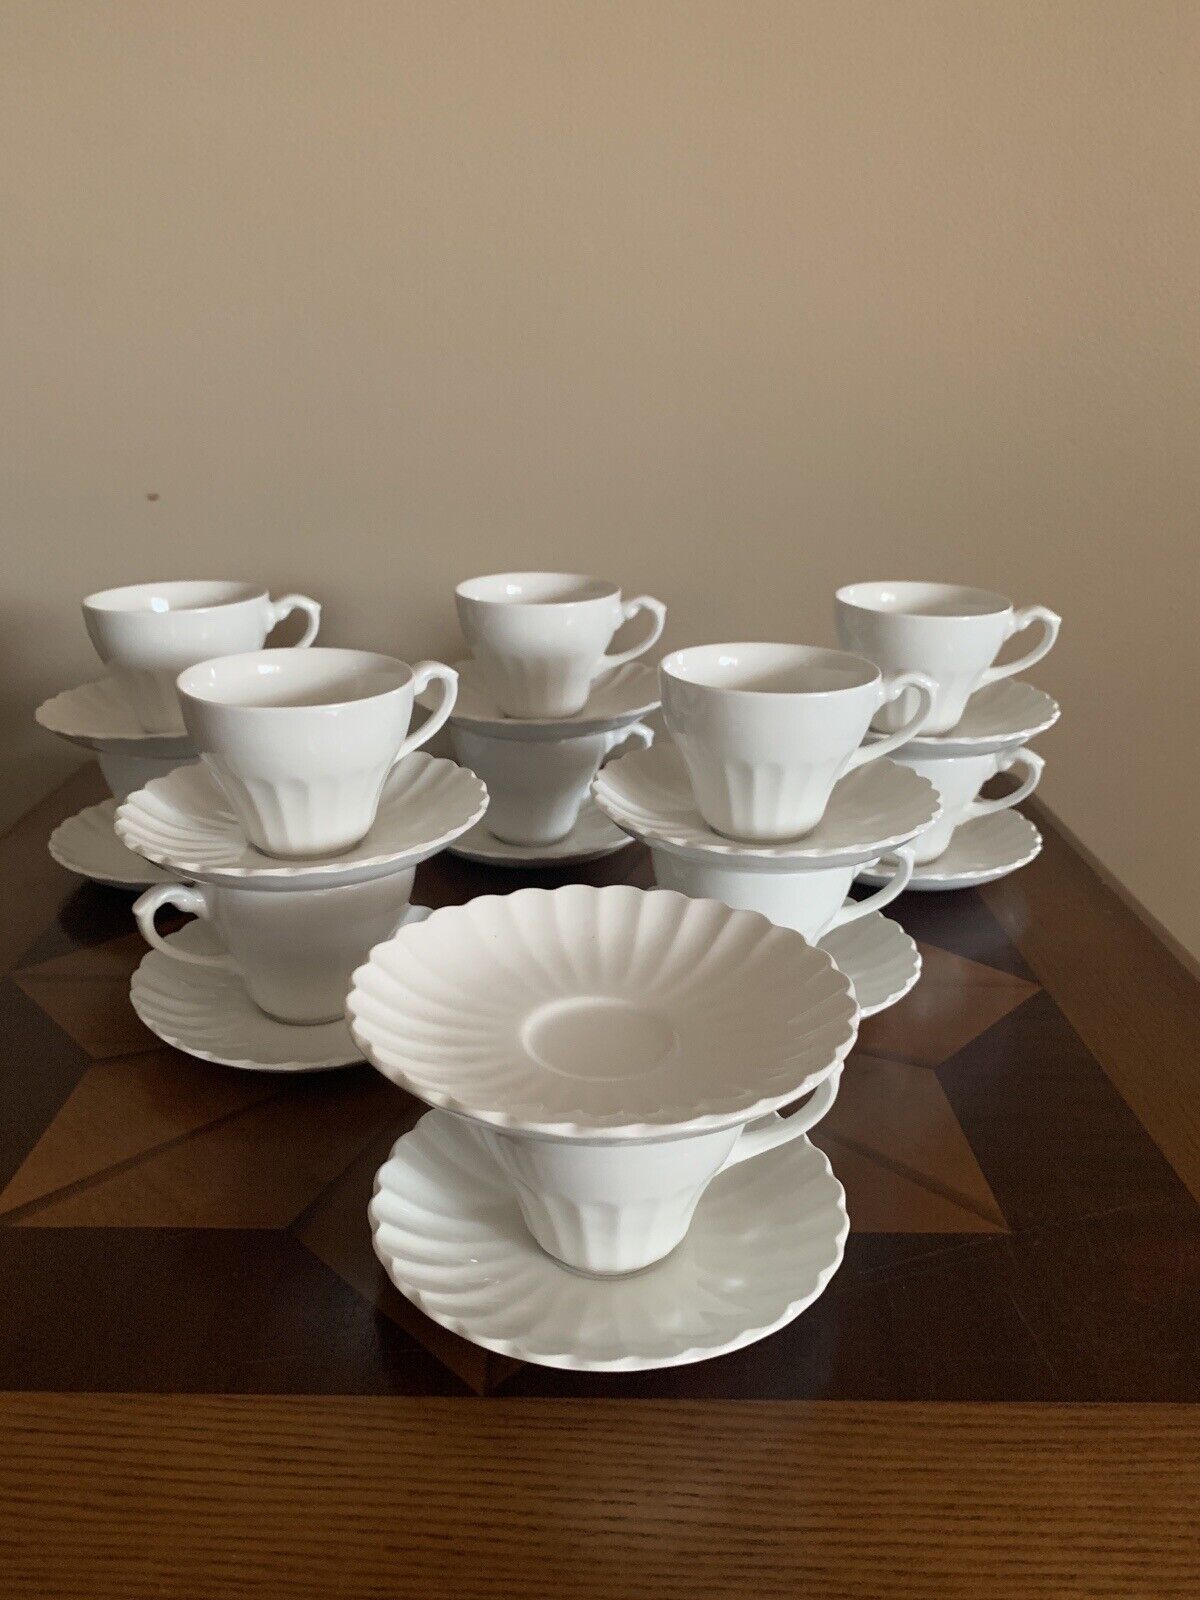 Primary image for Classic White J&G Meakin English Ironstone Cup & Saucer Sets Vintage  Tea/coffee